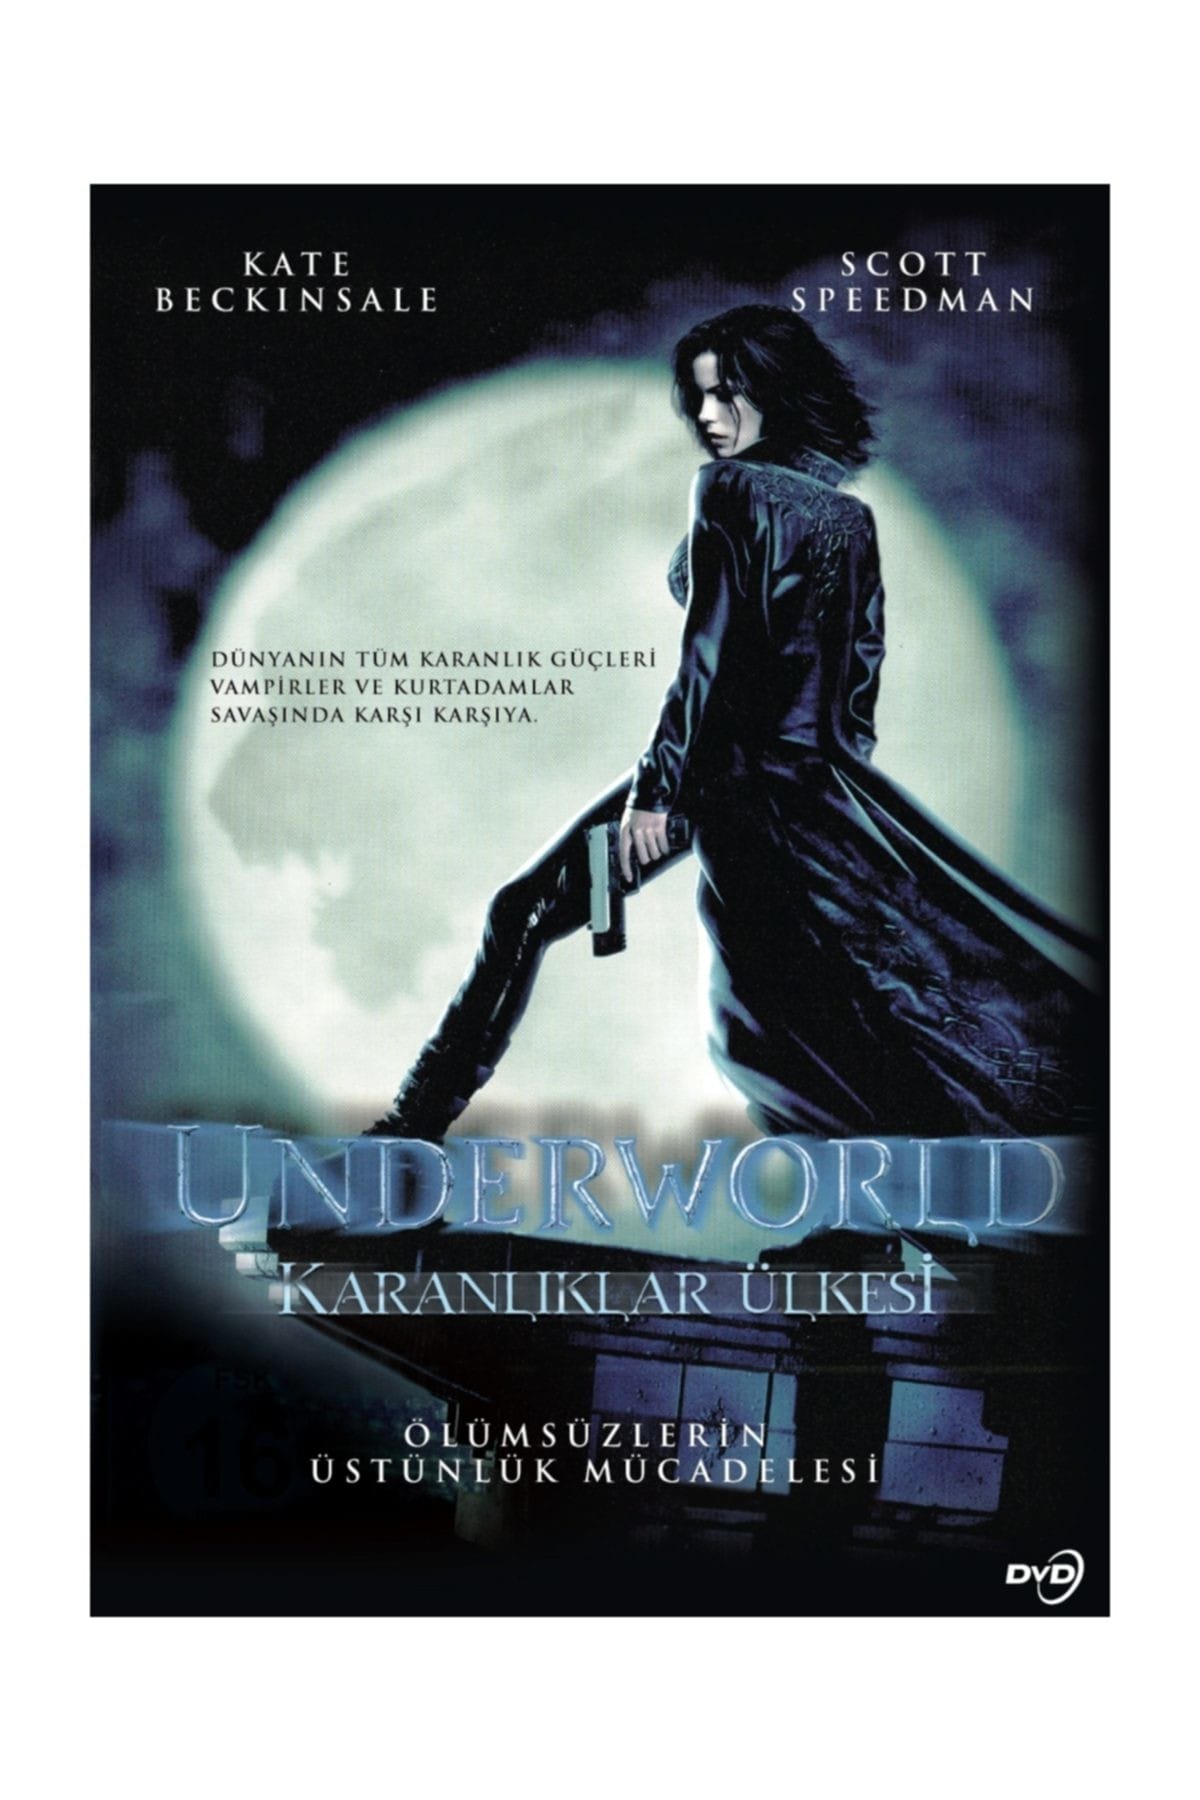 Underworld (2003) Extended & Unrated Cut 448Kbps 23.976Fps 48Khz 5.1Ch DVD Turkish Audio TAC